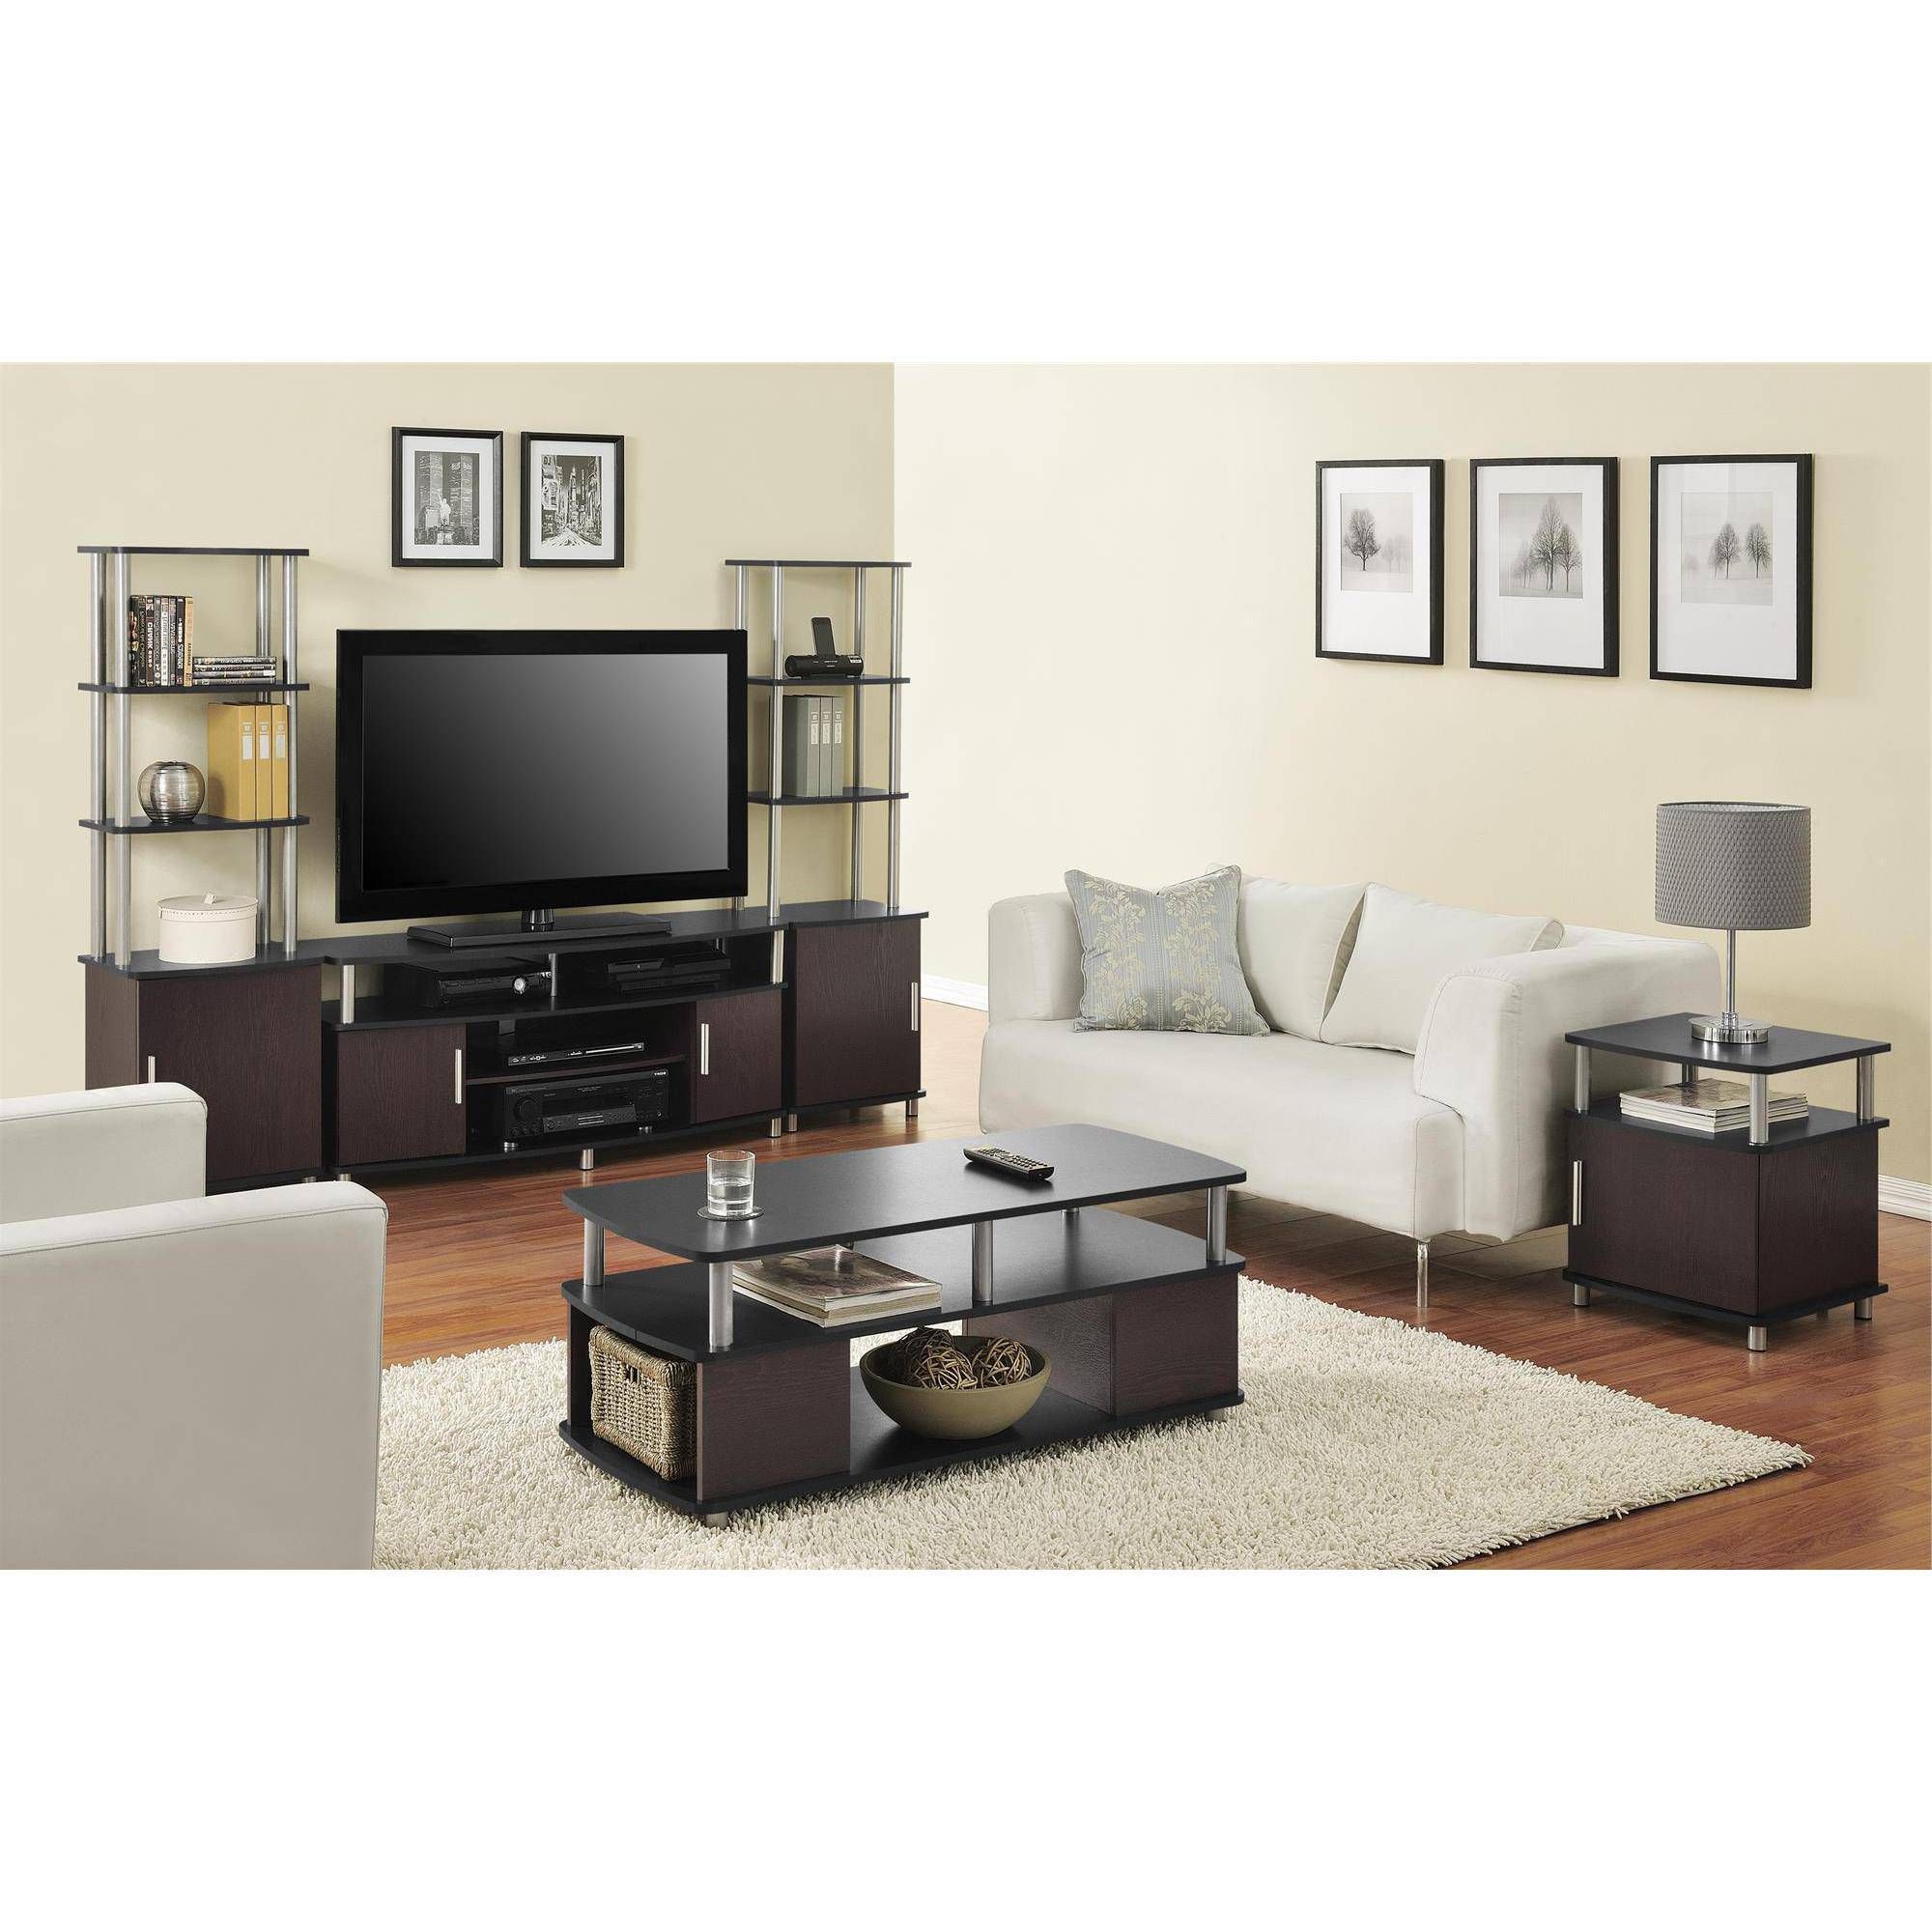 Recent Matching Tv Stand And Computer Desk Can I Use A Coffee Table As Regarding Tv Unit And Coffee Table Sets (View 7 of 20)